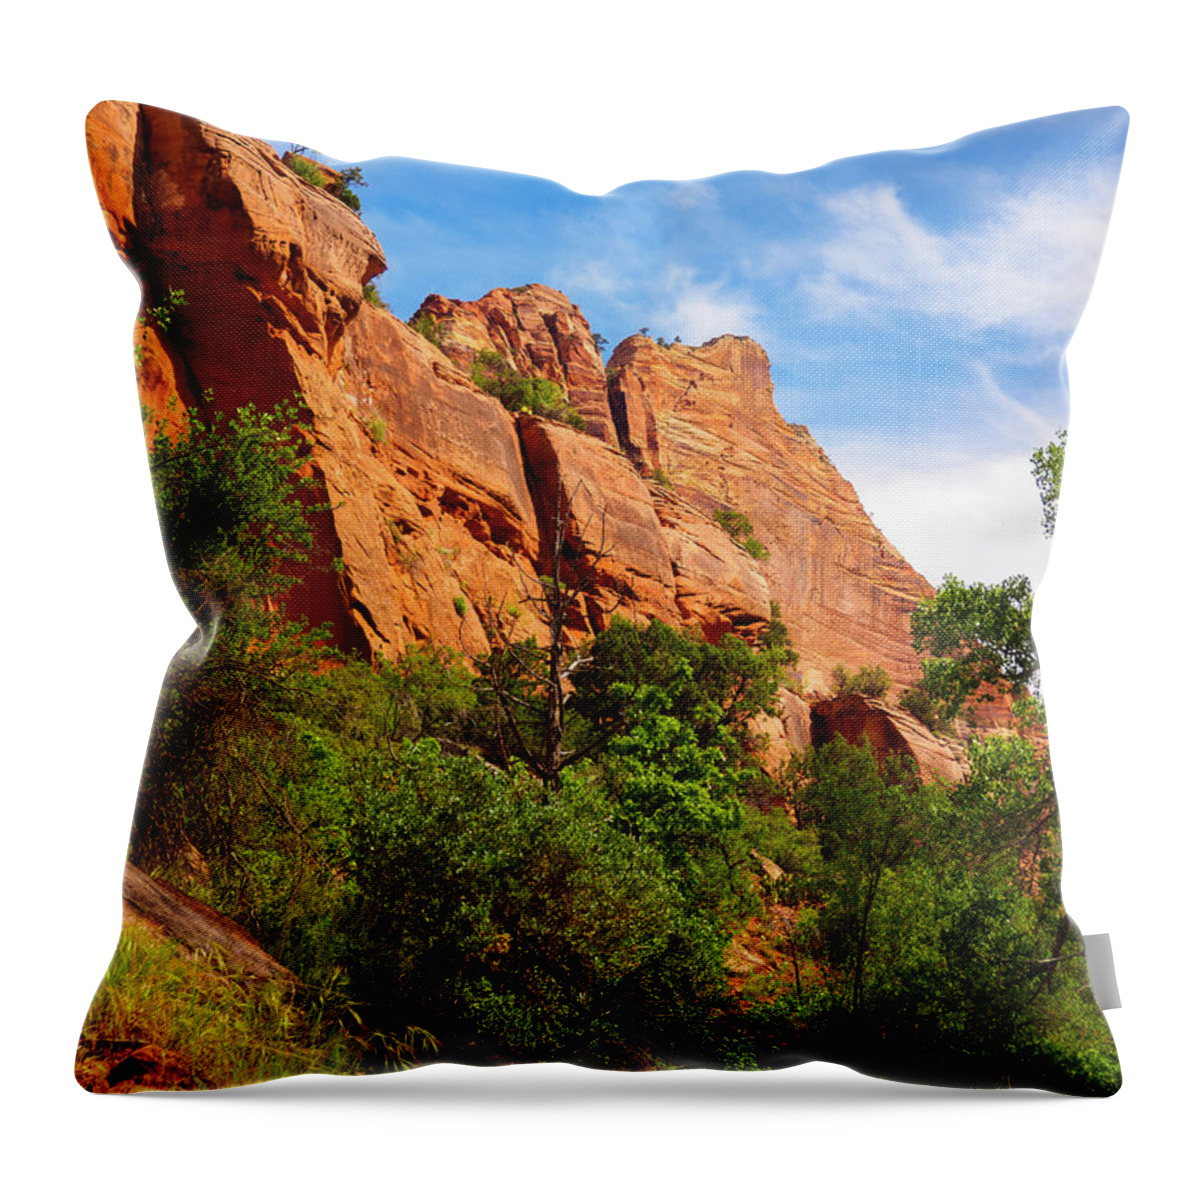 Blue Throw Pillow featuring the photograph Zion National Park 1 by Penny Lisowski